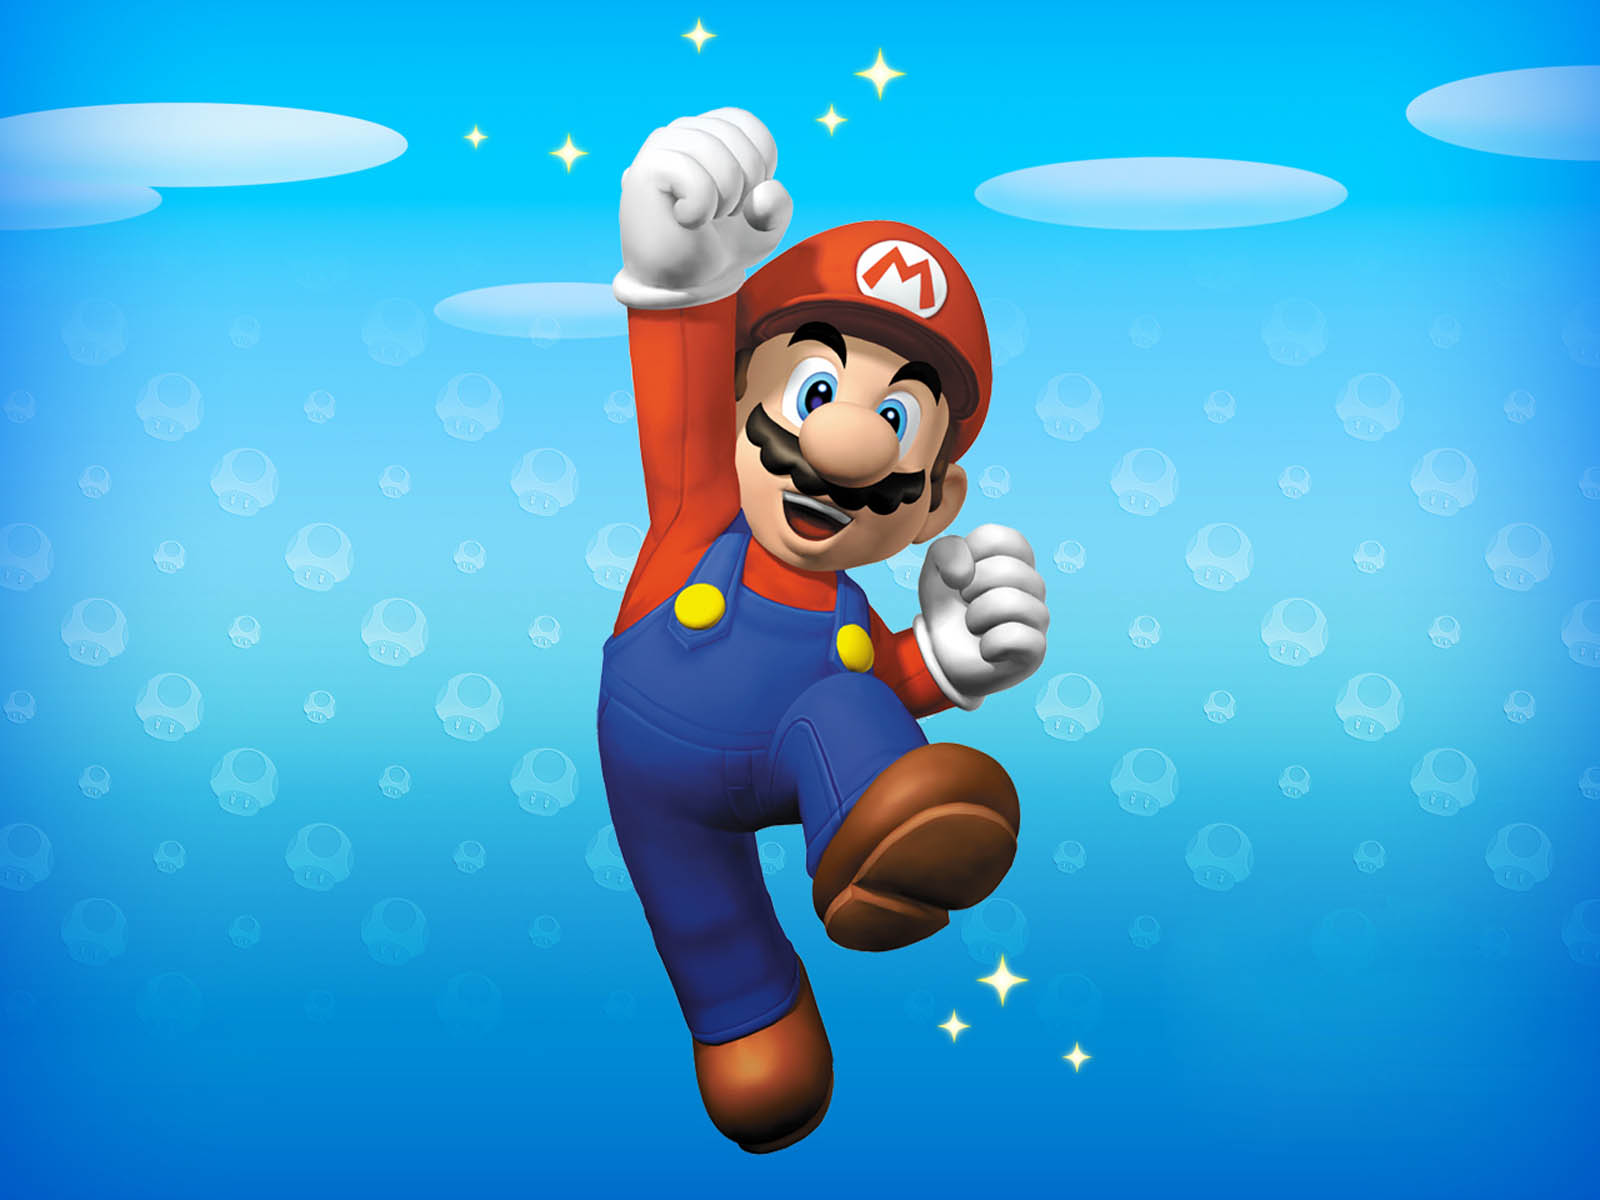  Mario Wallpapers Images Photos Pictures and Backgrounds for free